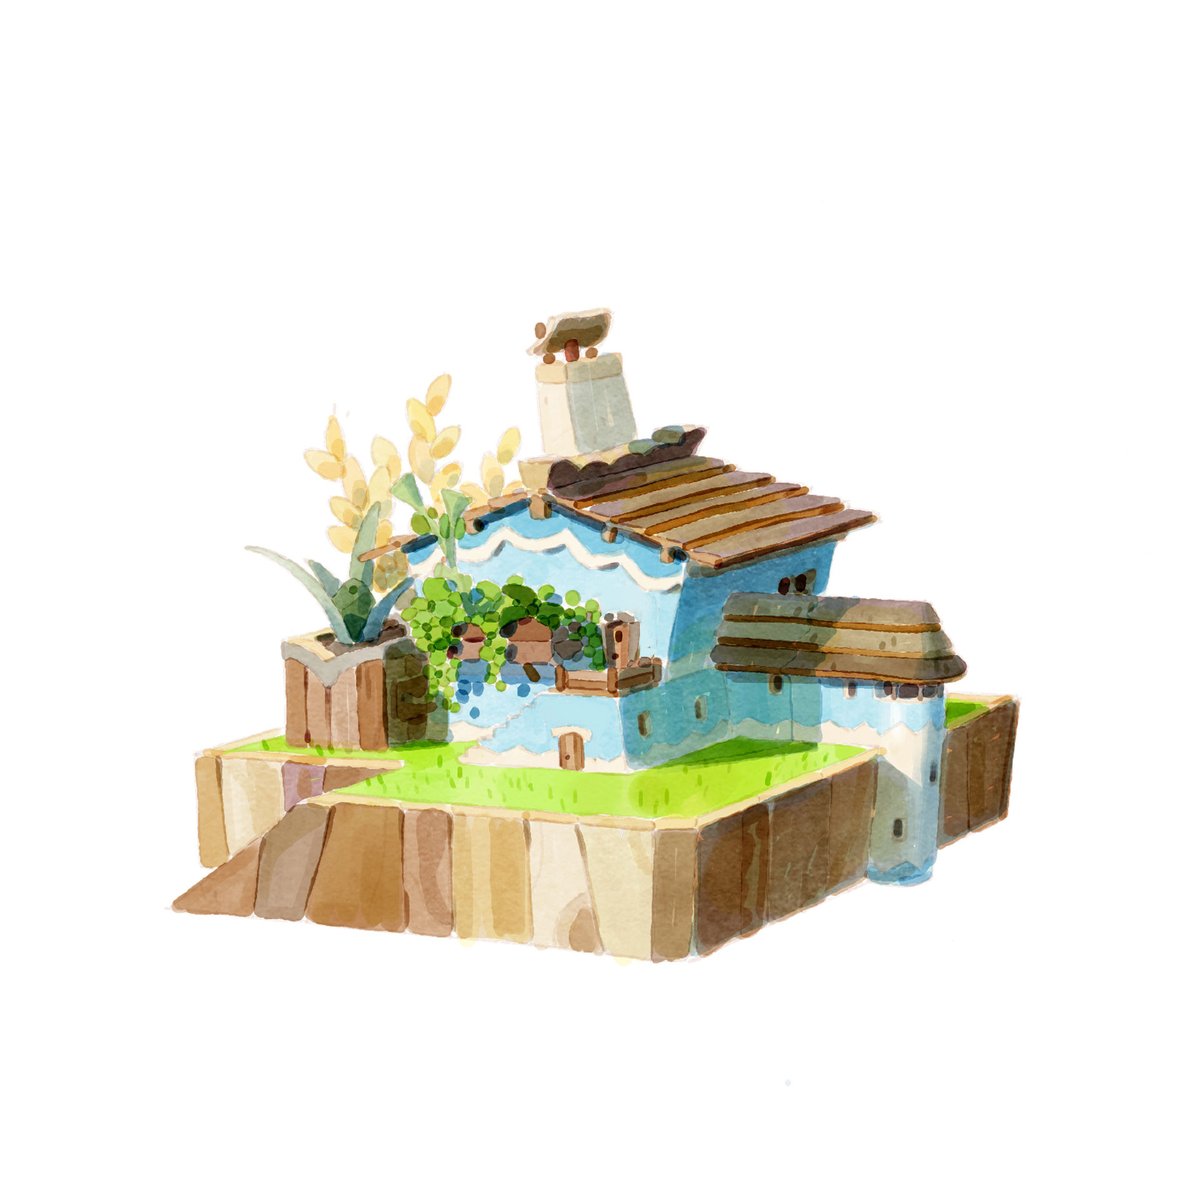 grass no humans outdoors moss rock house scenery  illustration images